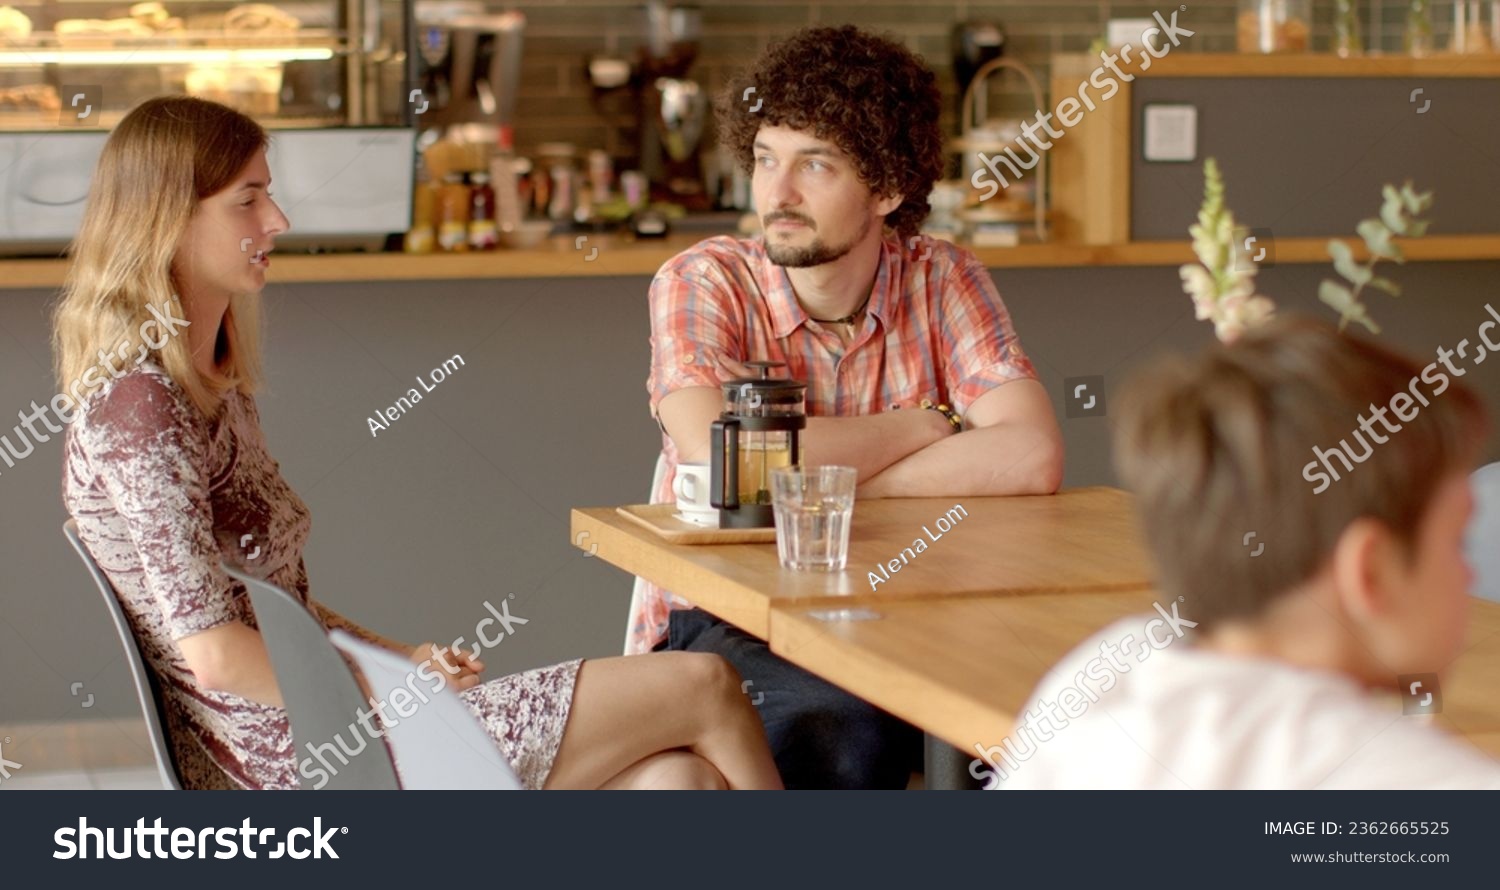 Adult siblings sit at table in restaurant, discussing childhood traumas they both experienced in past. Exchange support, advice, stories about how they cope with aftermath of their experiences. Life #2362665525